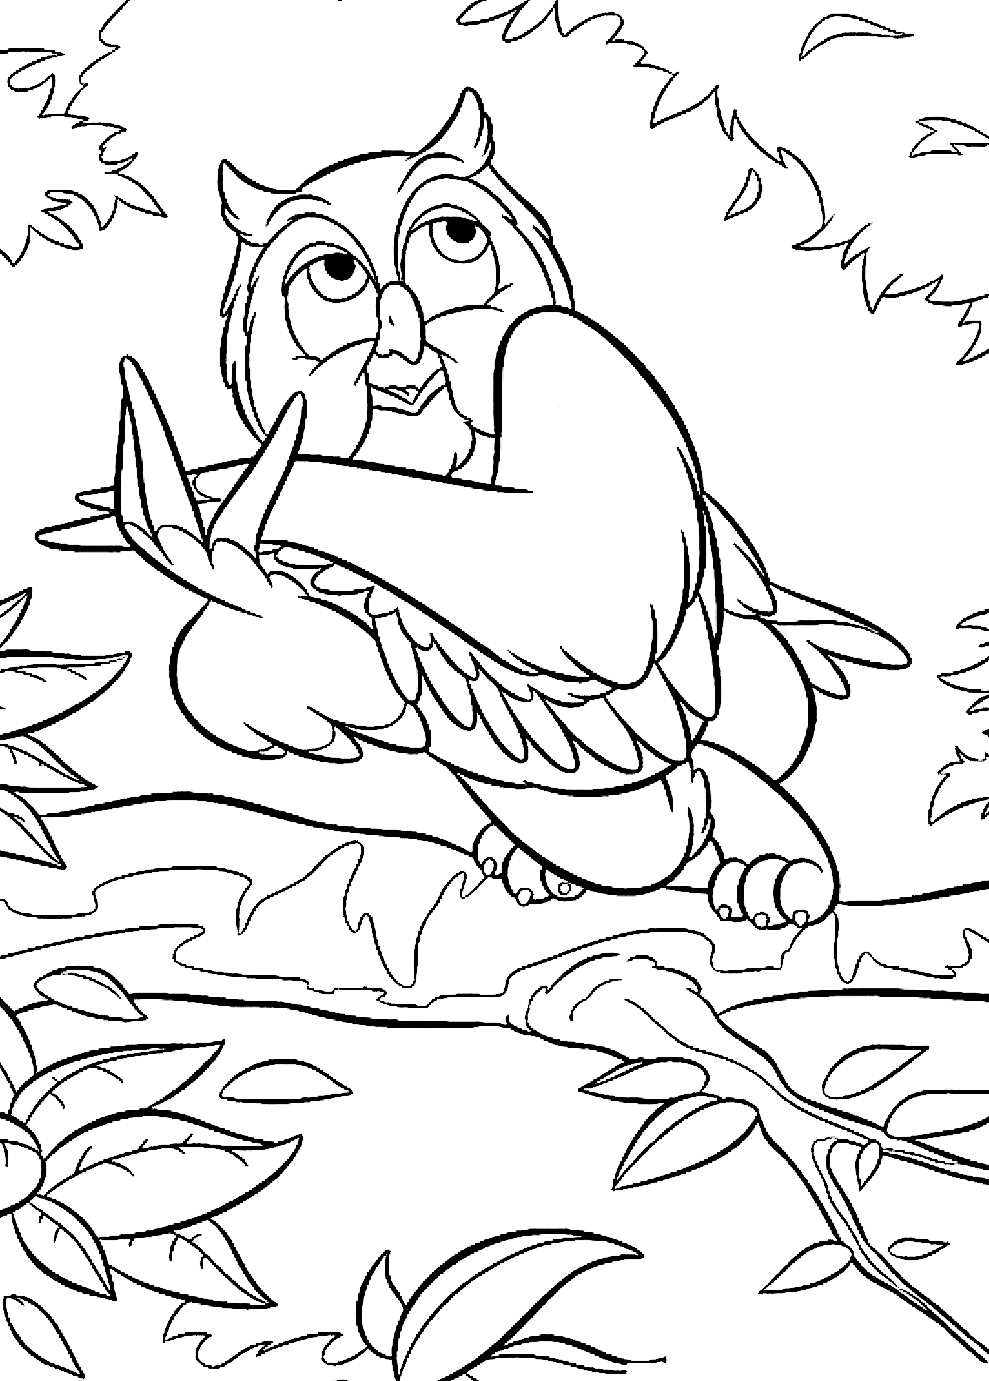 Owl to Print Coloring Page